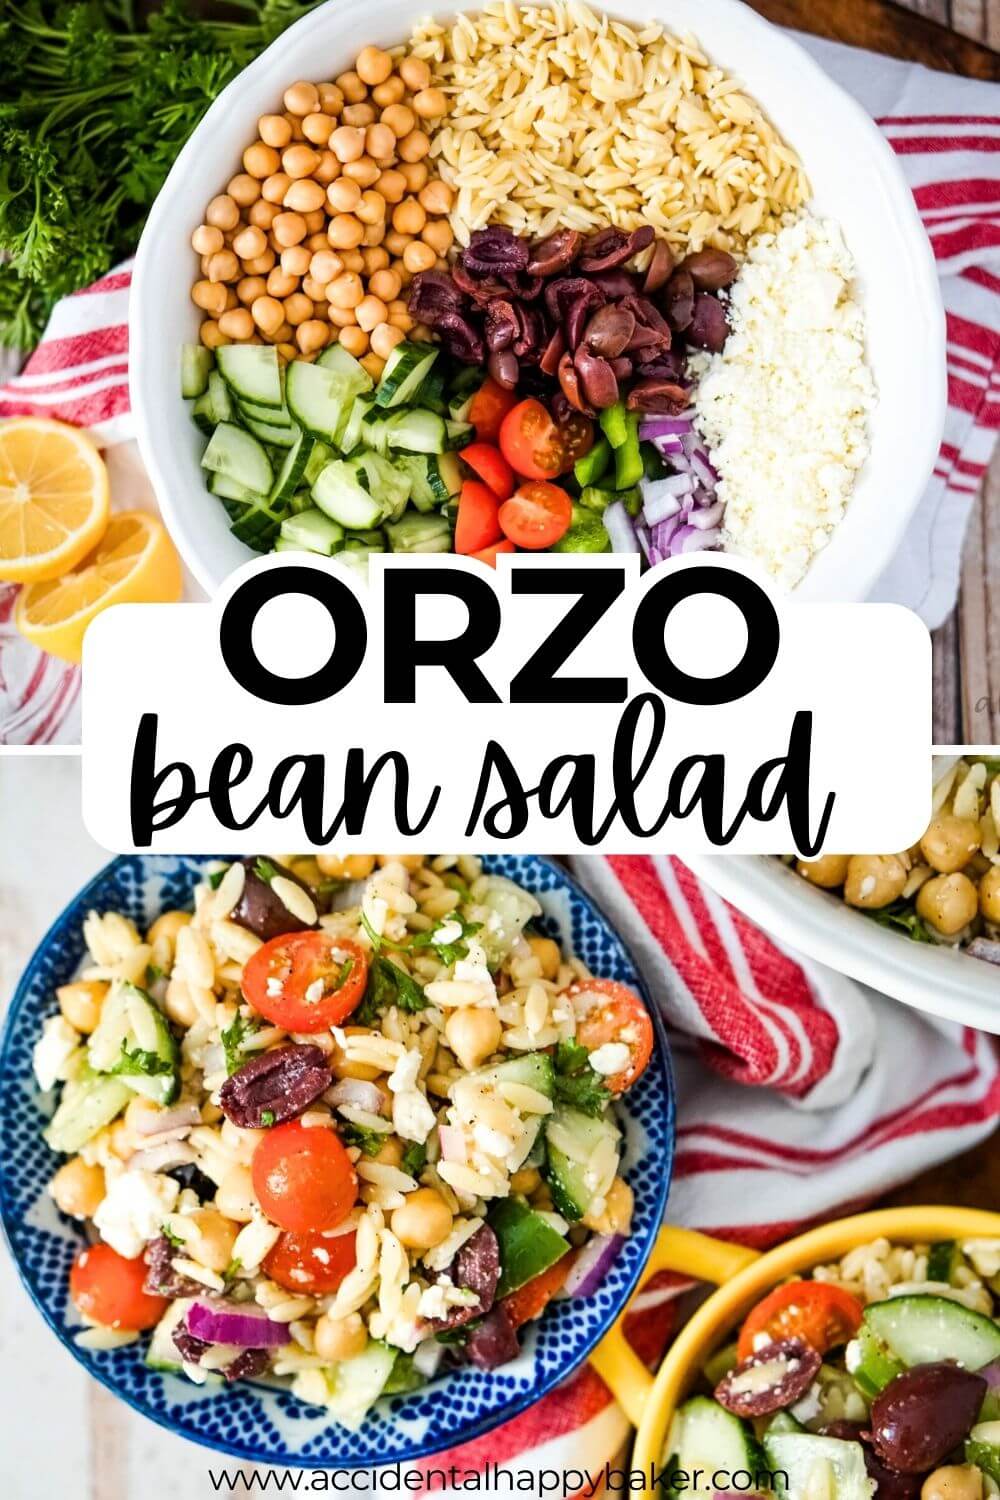 Easy Orzo Garbanzo Bean Salad is vibrant, fresh, and as full of bold flavors as it is veggies! This protein rich salad keeps well for days and makes an excellent side dish as well as a vegetarian lunch for those busy work days.